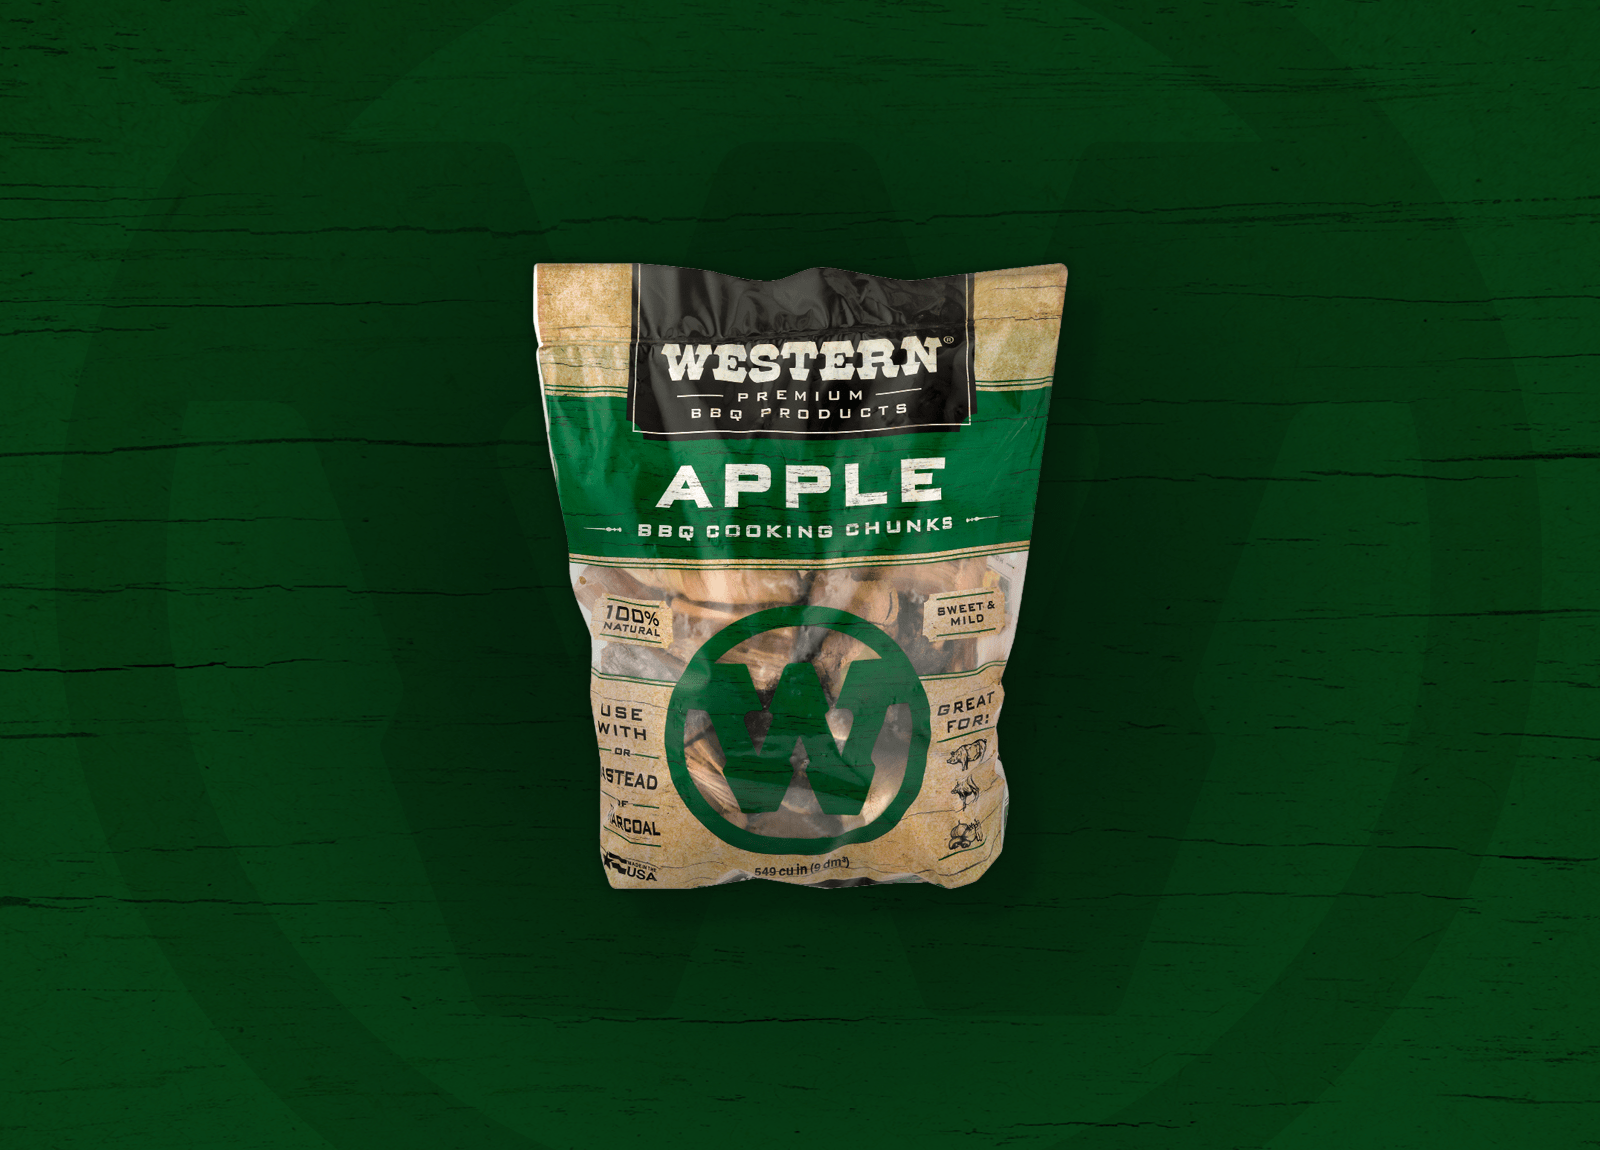 Bag of Western Apple Cooking Chunks